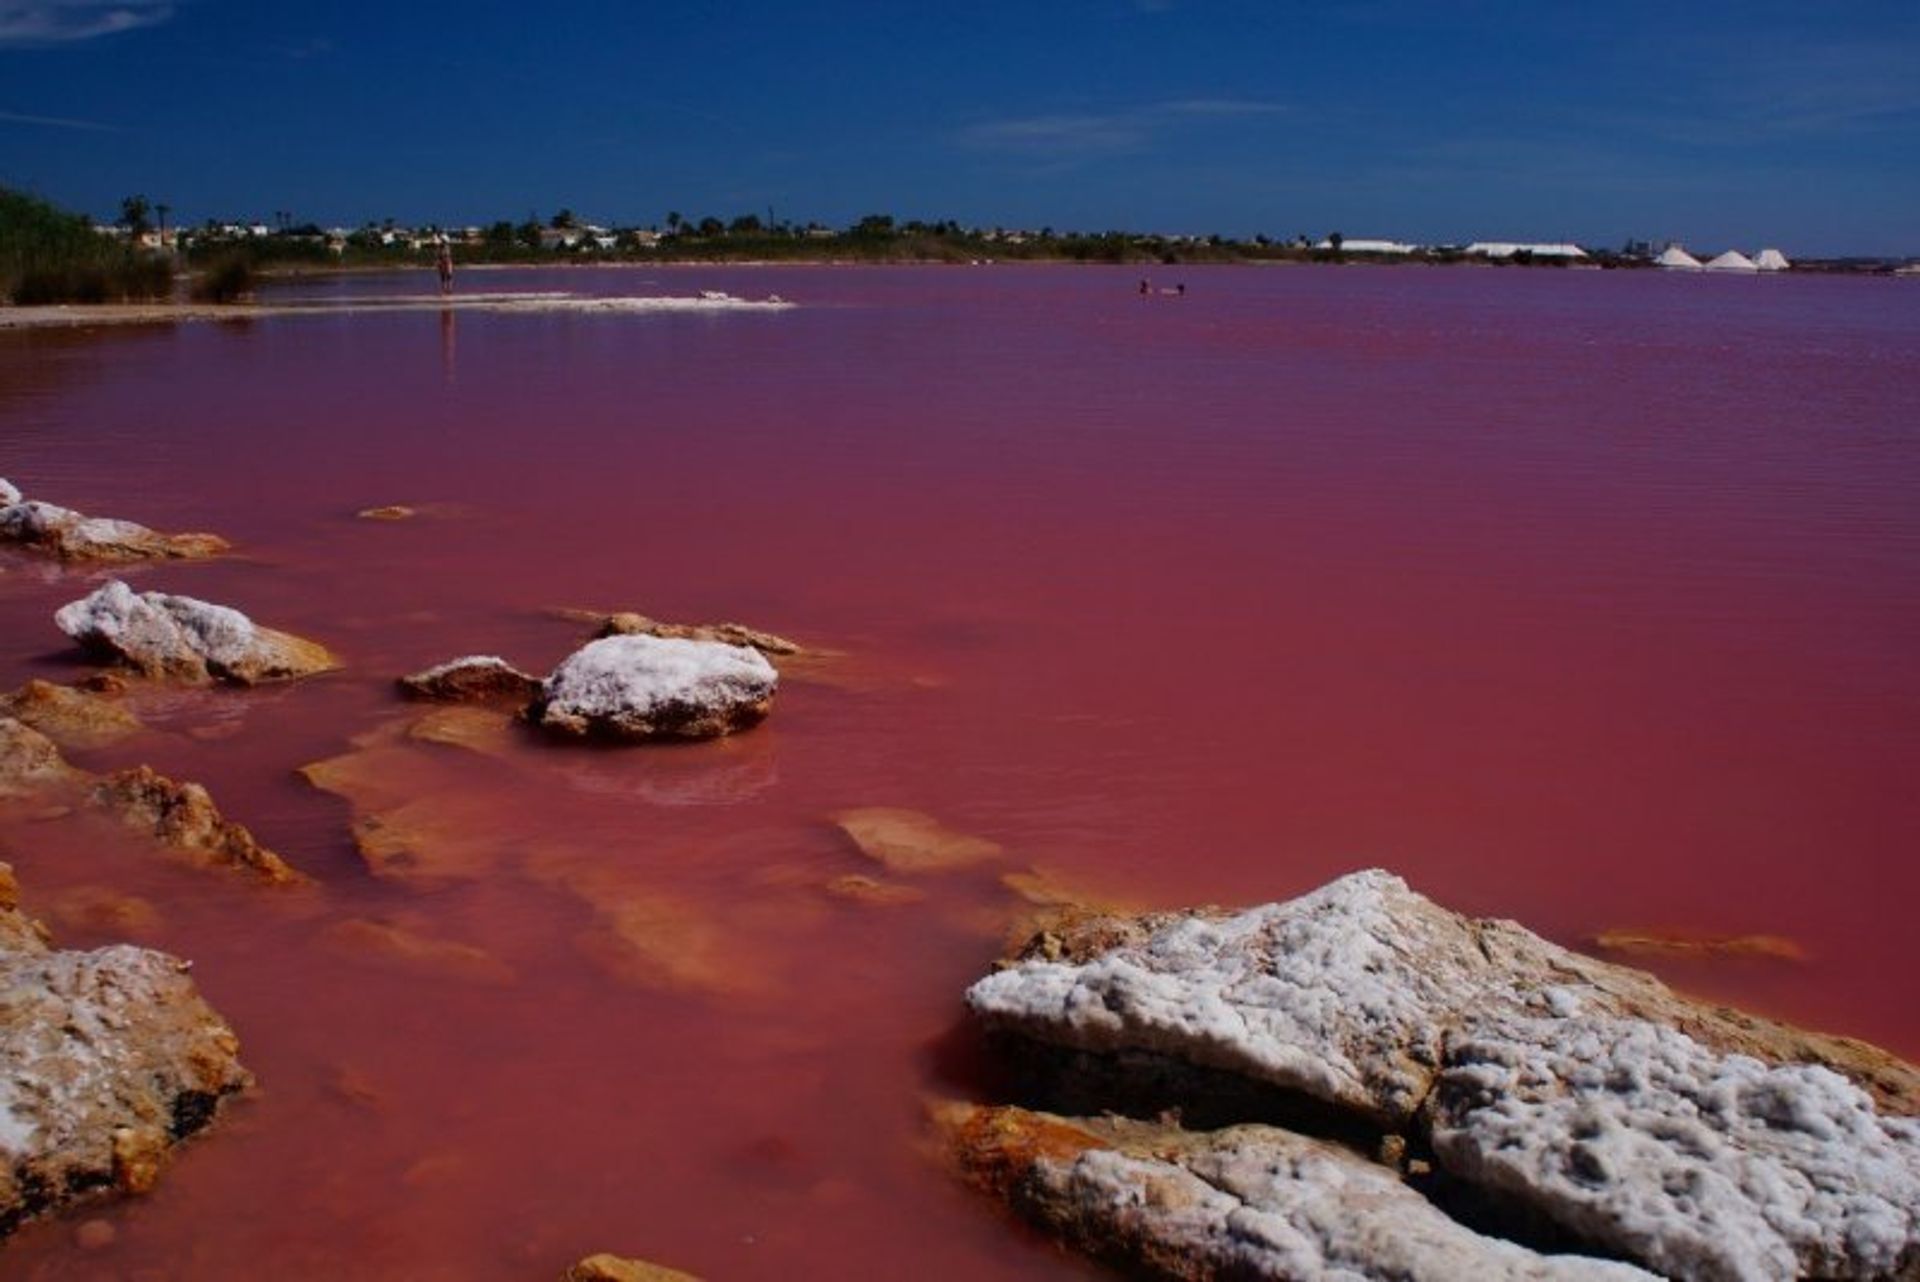 Only 10 minutes from Playa Flamenca, Torrevieja is famous for its two cleansing saltwater lakes; one pink and the other green